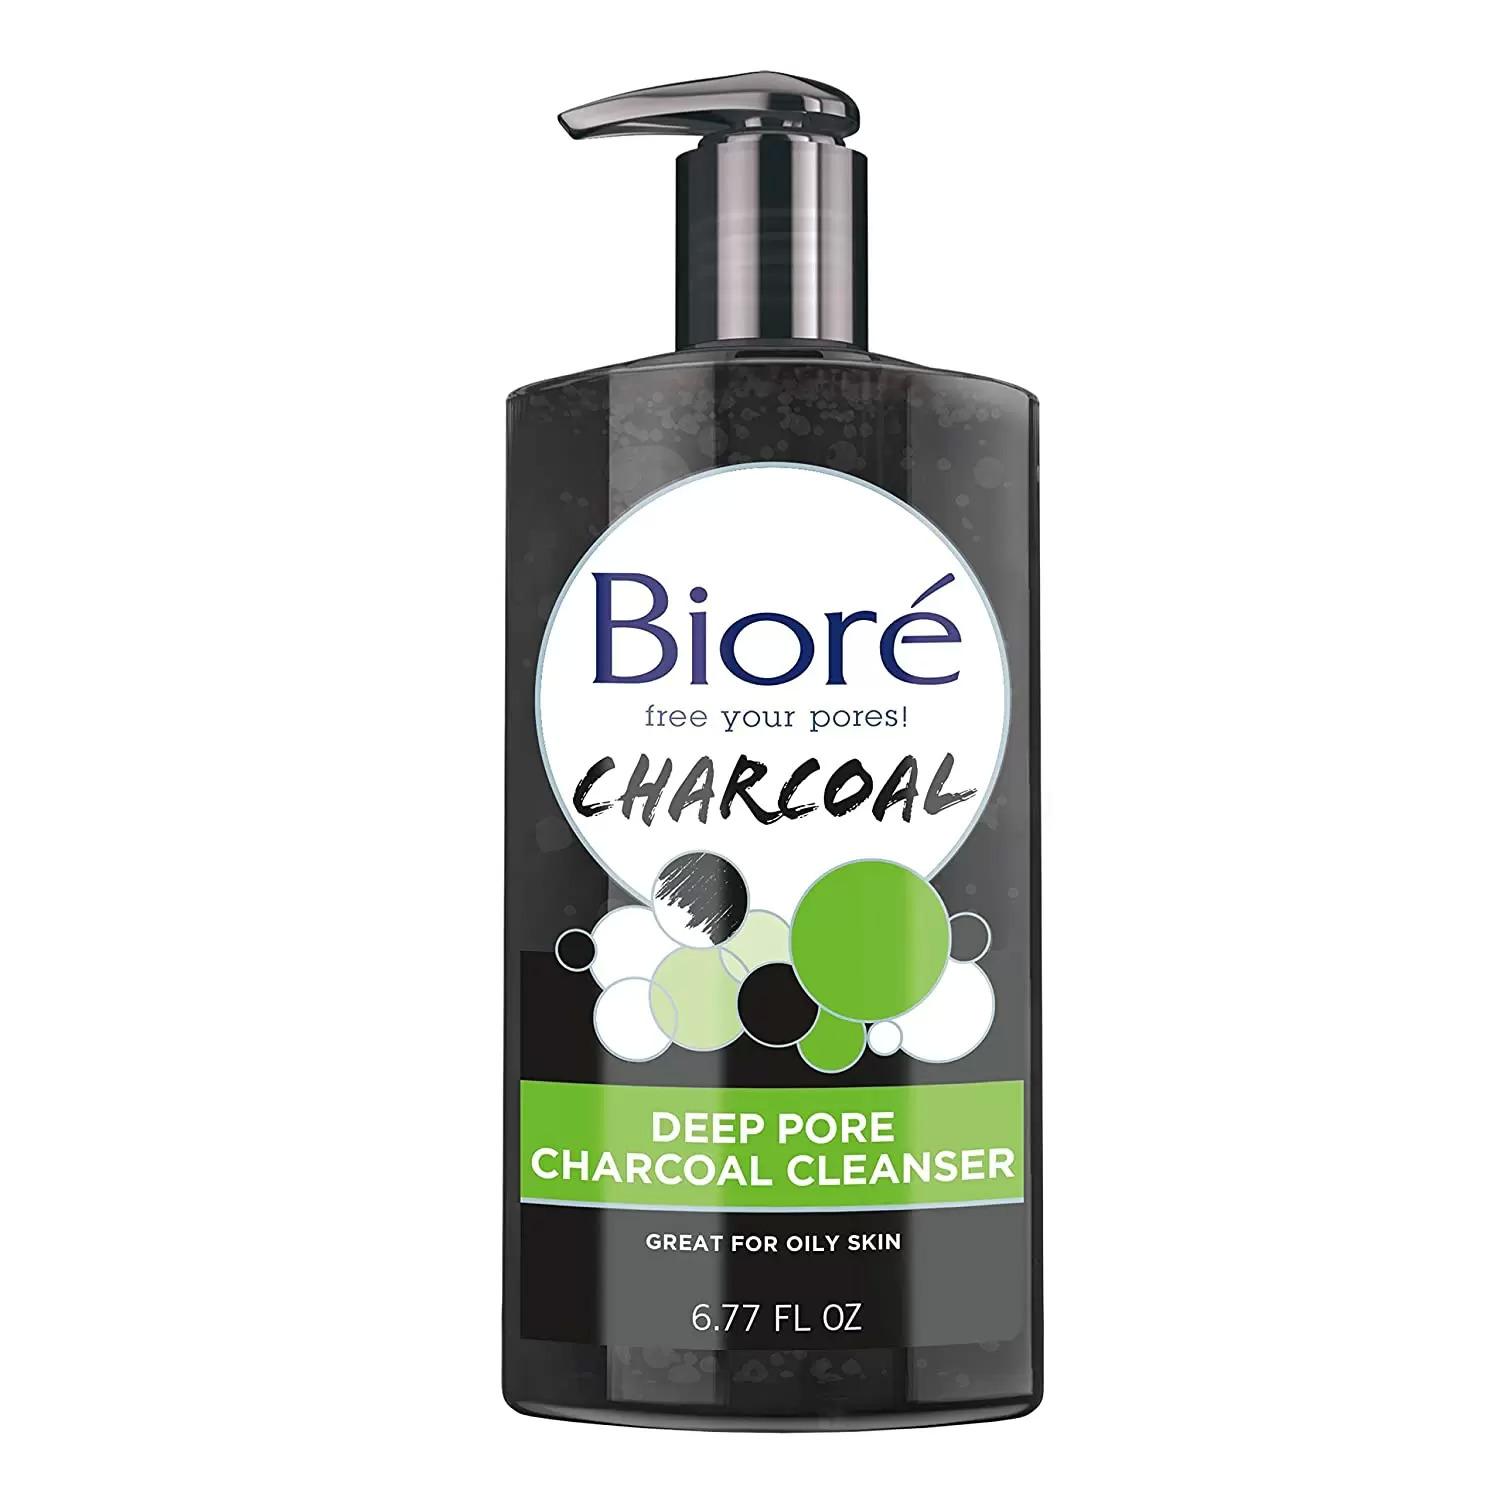 Biore Deep Pore Charcoal Facial Cleanser for $3.95 Shipped